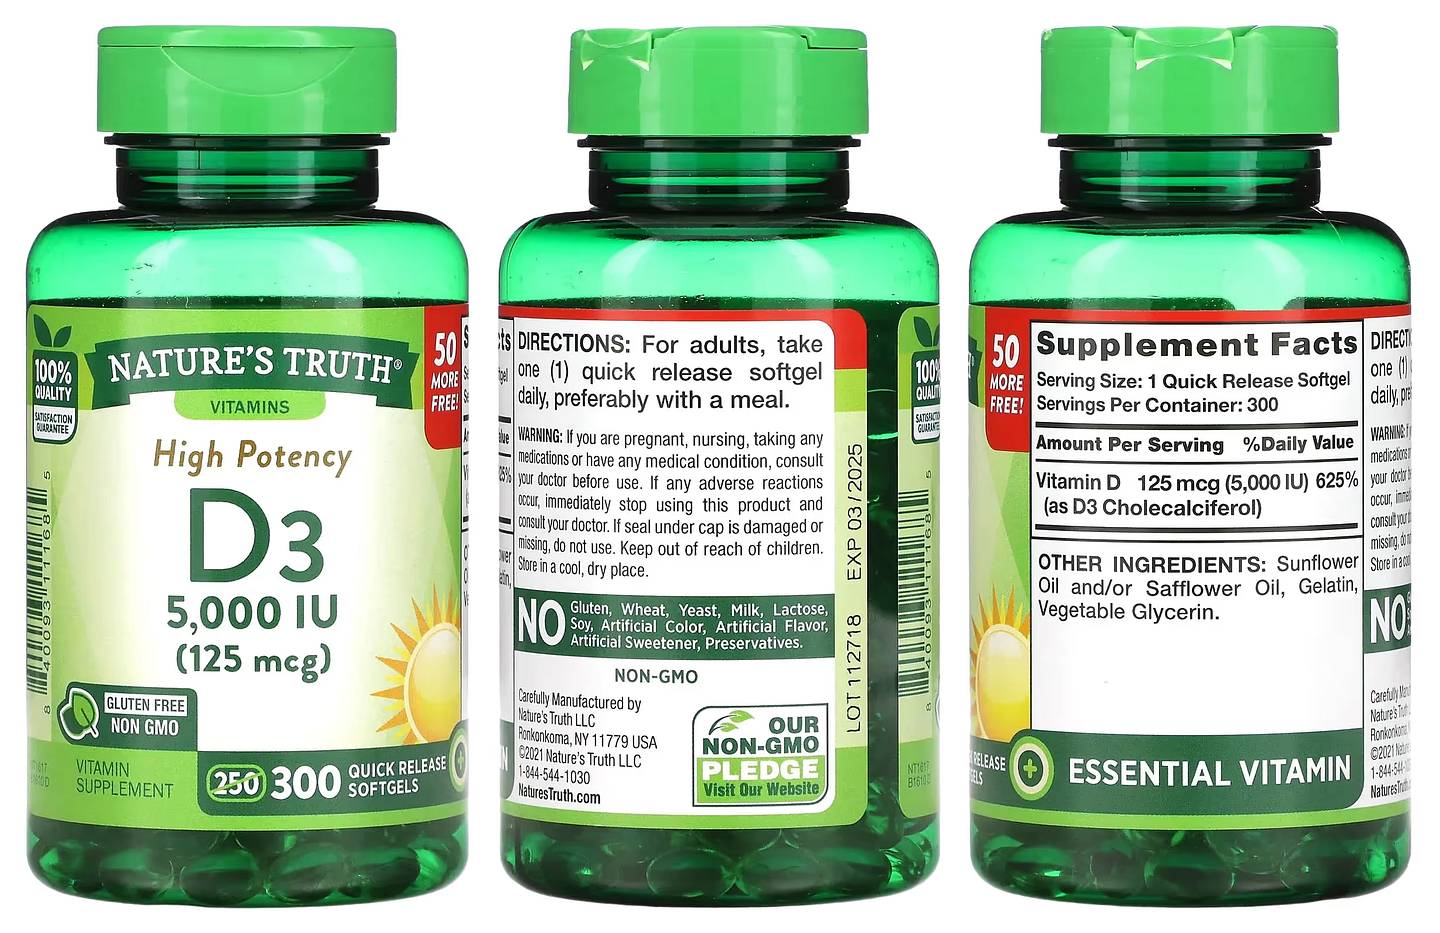 Nature's Truth, High Potency Vitamin D3 packaging